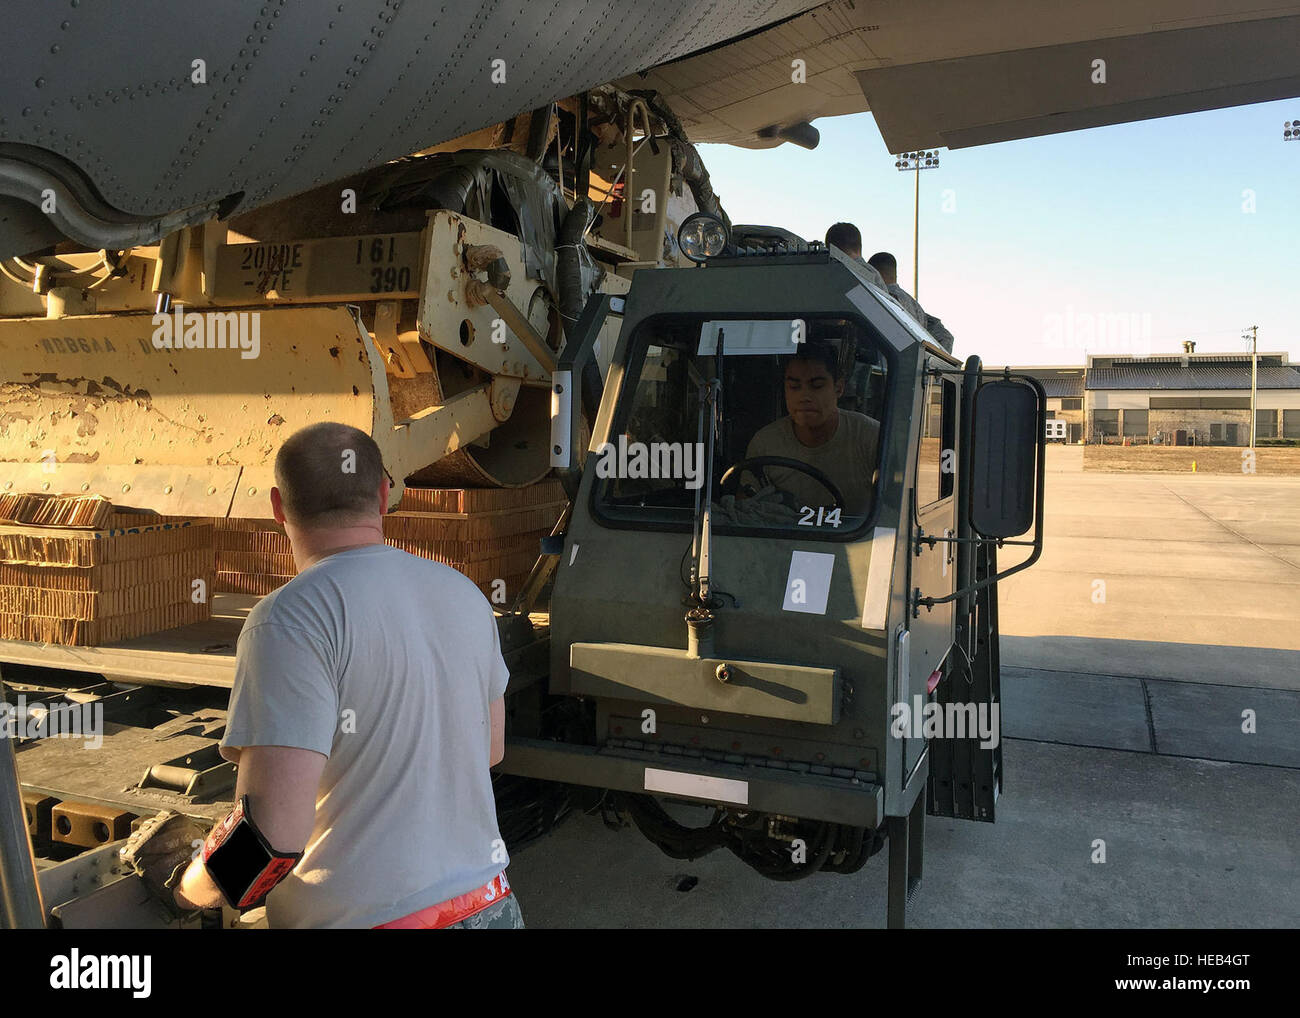 Air Force Tech. Sgt. Joshua Gaines, left, and Airman 1st Class Stacey Svensrud, driver, both assigned to the 3rd Aerial Port Squadron, operate a Halvorsen Loader to load a U.S. Army vehicle onto a C-130H Hercules aircraft from the 145th Airlift Wing, Charlotte, N.C. on Jan. 21, Pope Army Airfield, N.C. This operation was supporting daily Joint Airborne/Air Transportability Training sorties conducted at Pope Field. Stock Photo